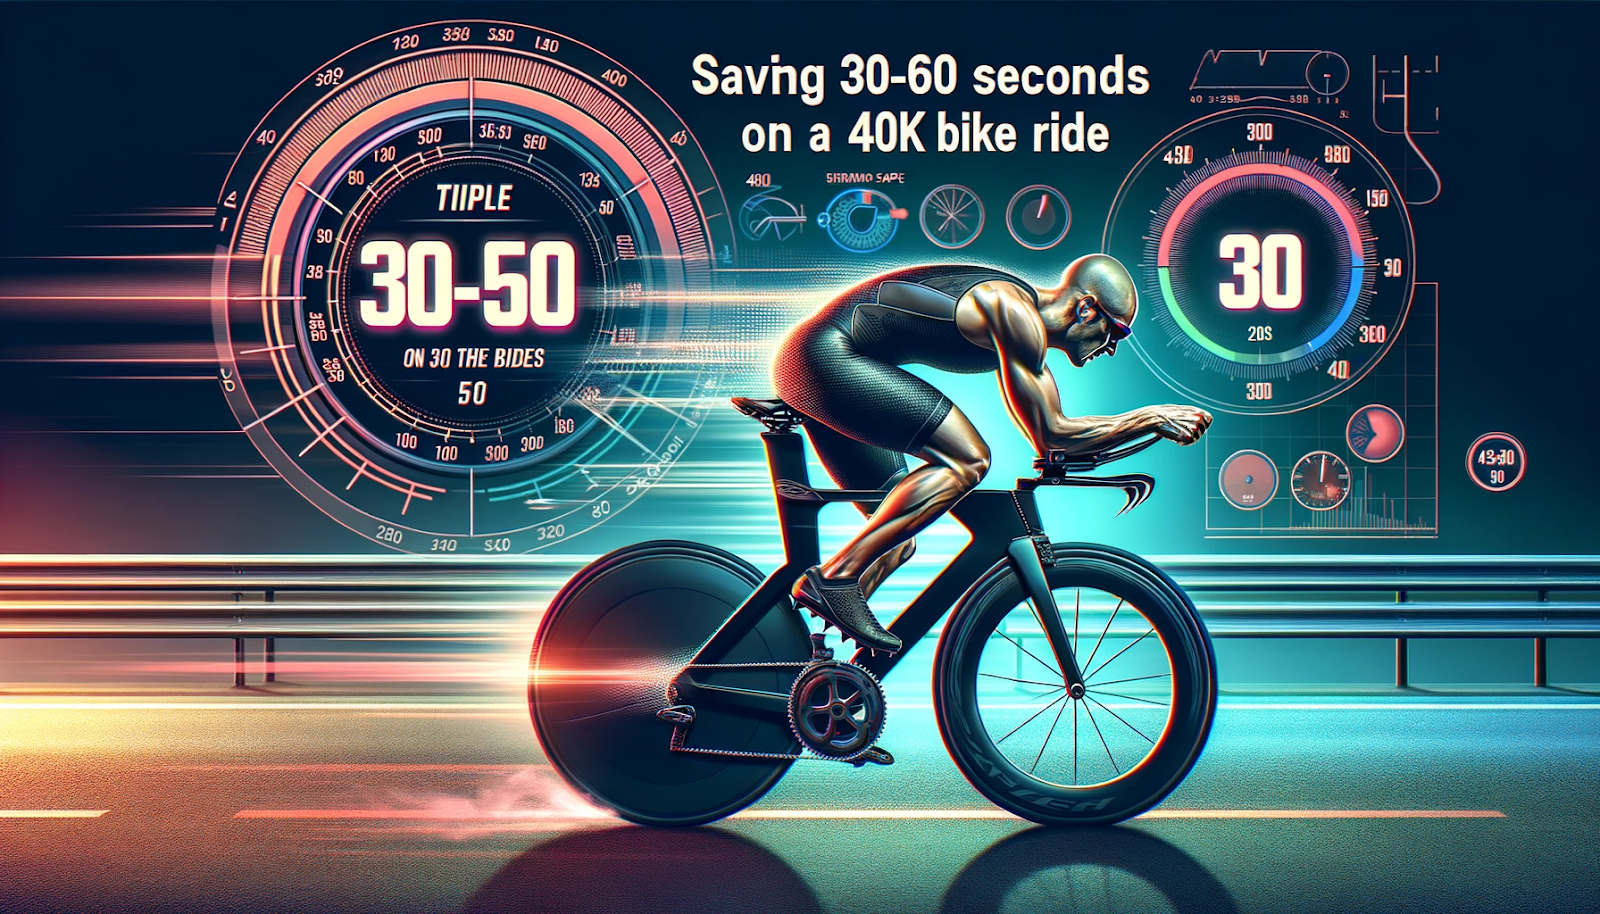 Photo of a triathlete riding a top-tier triathlon bike on a race track. The athlete is in a streamlined position, emphasizing the aerodynamics of the bike. The background shows a digital timer clocking the bike's speed, with a caption underneath stating 'Saving 30-60 seconds on a 40k bike ride'. Surrounding graphics illustrate the wind resistance being efficiently managed by the bike's design.